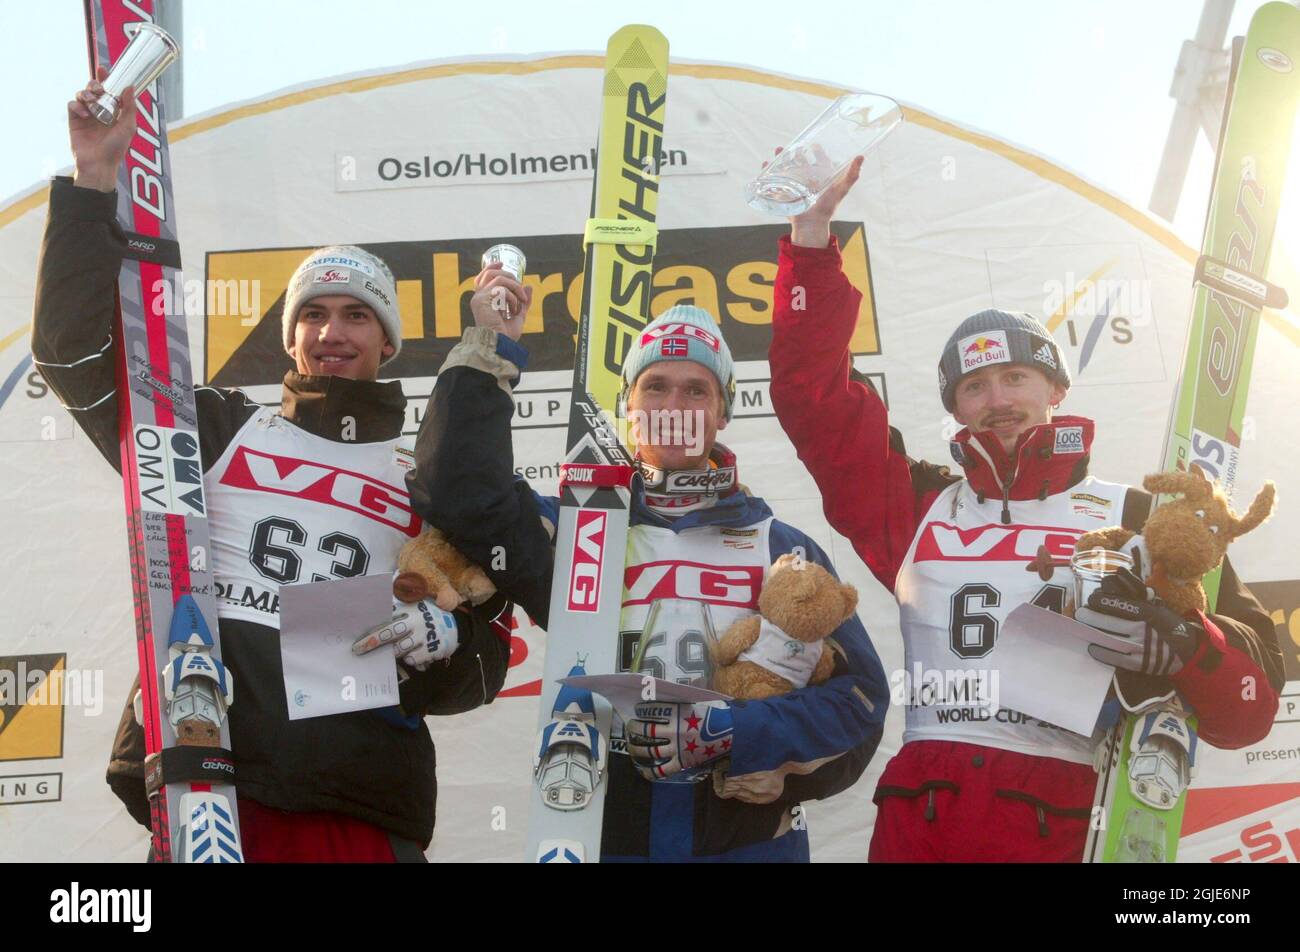 Poland's Adam Malysz (r) winner of the Men's World Cup ski jump with Norway's Roar Ljokelsoy (c) and Austria's Florian Liegl (l) who shared second place Stock Photo